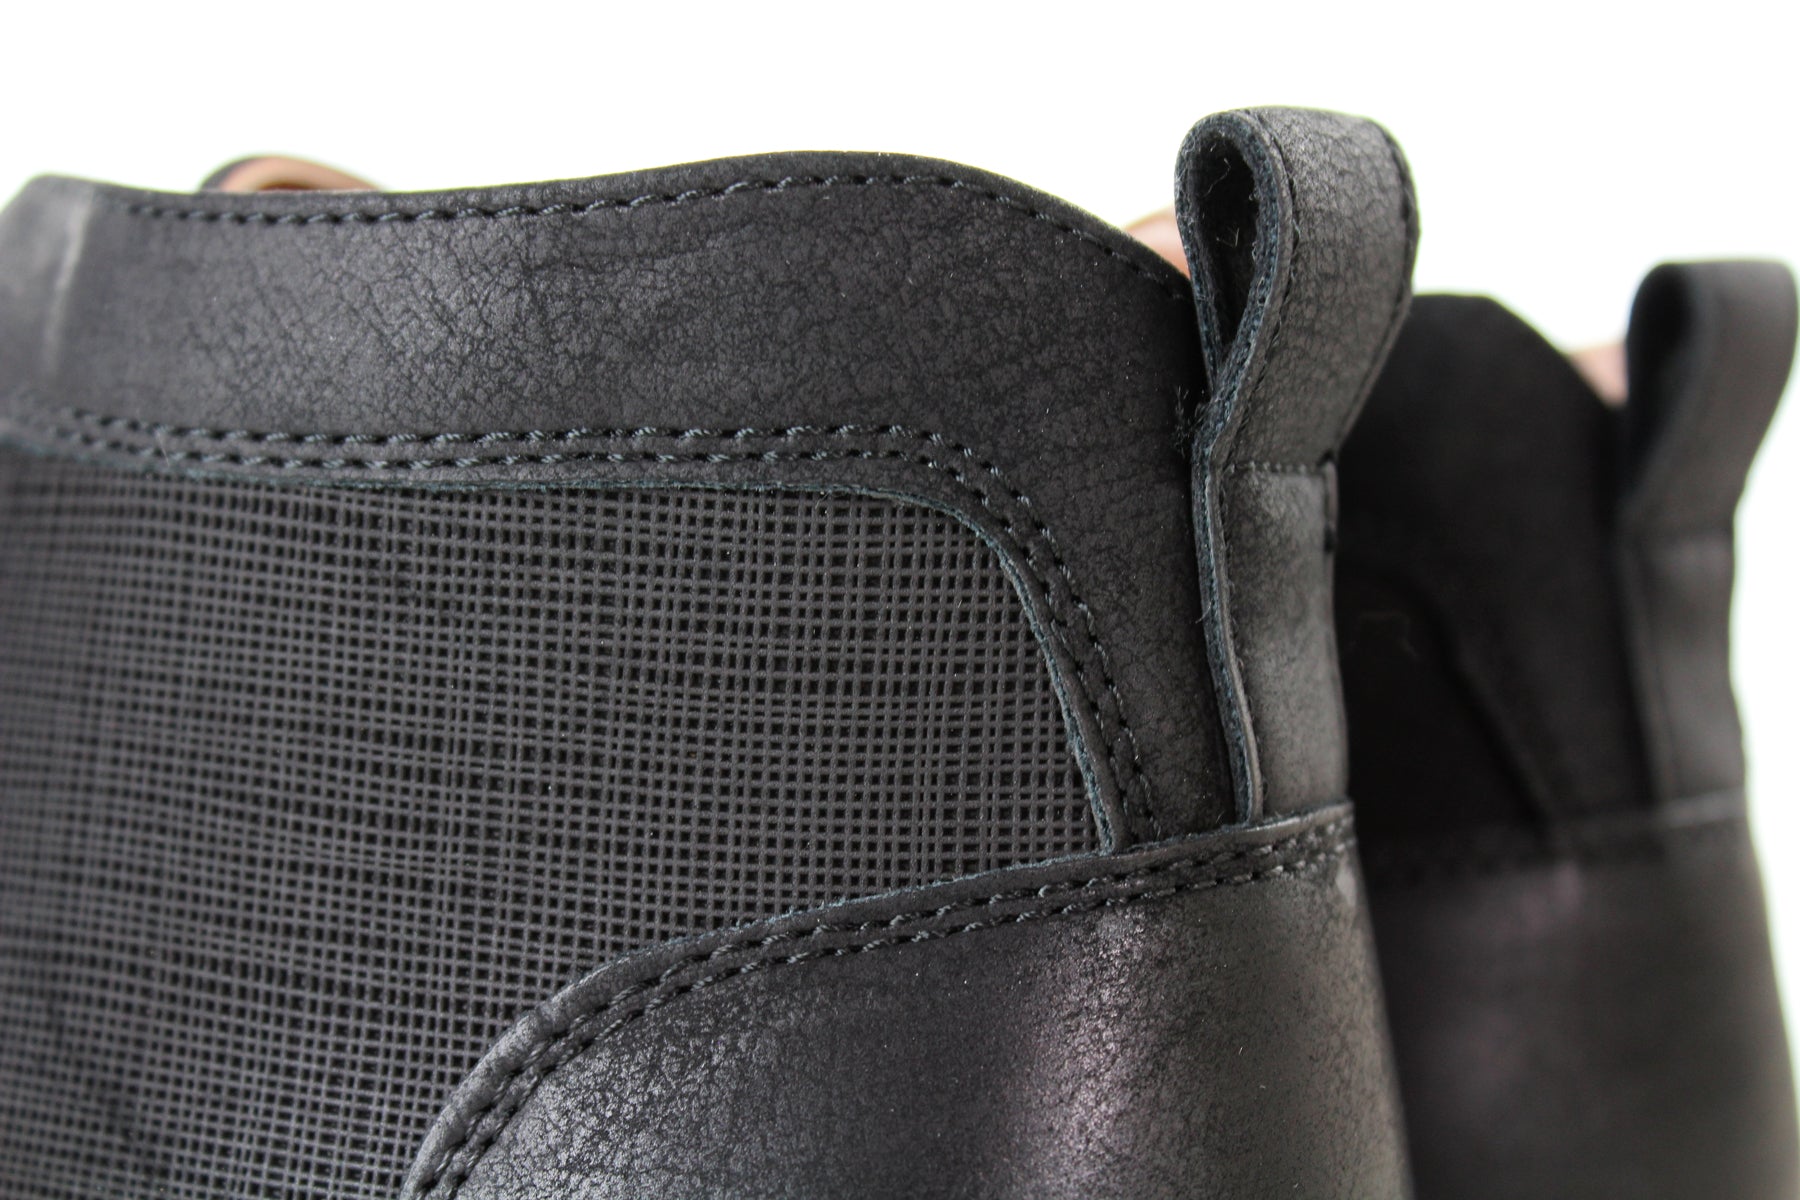 Mid-Top Zipper Boots | Blaine by Ferro Aldo | Conal Footwear | Close Up Pull Tab Angle View